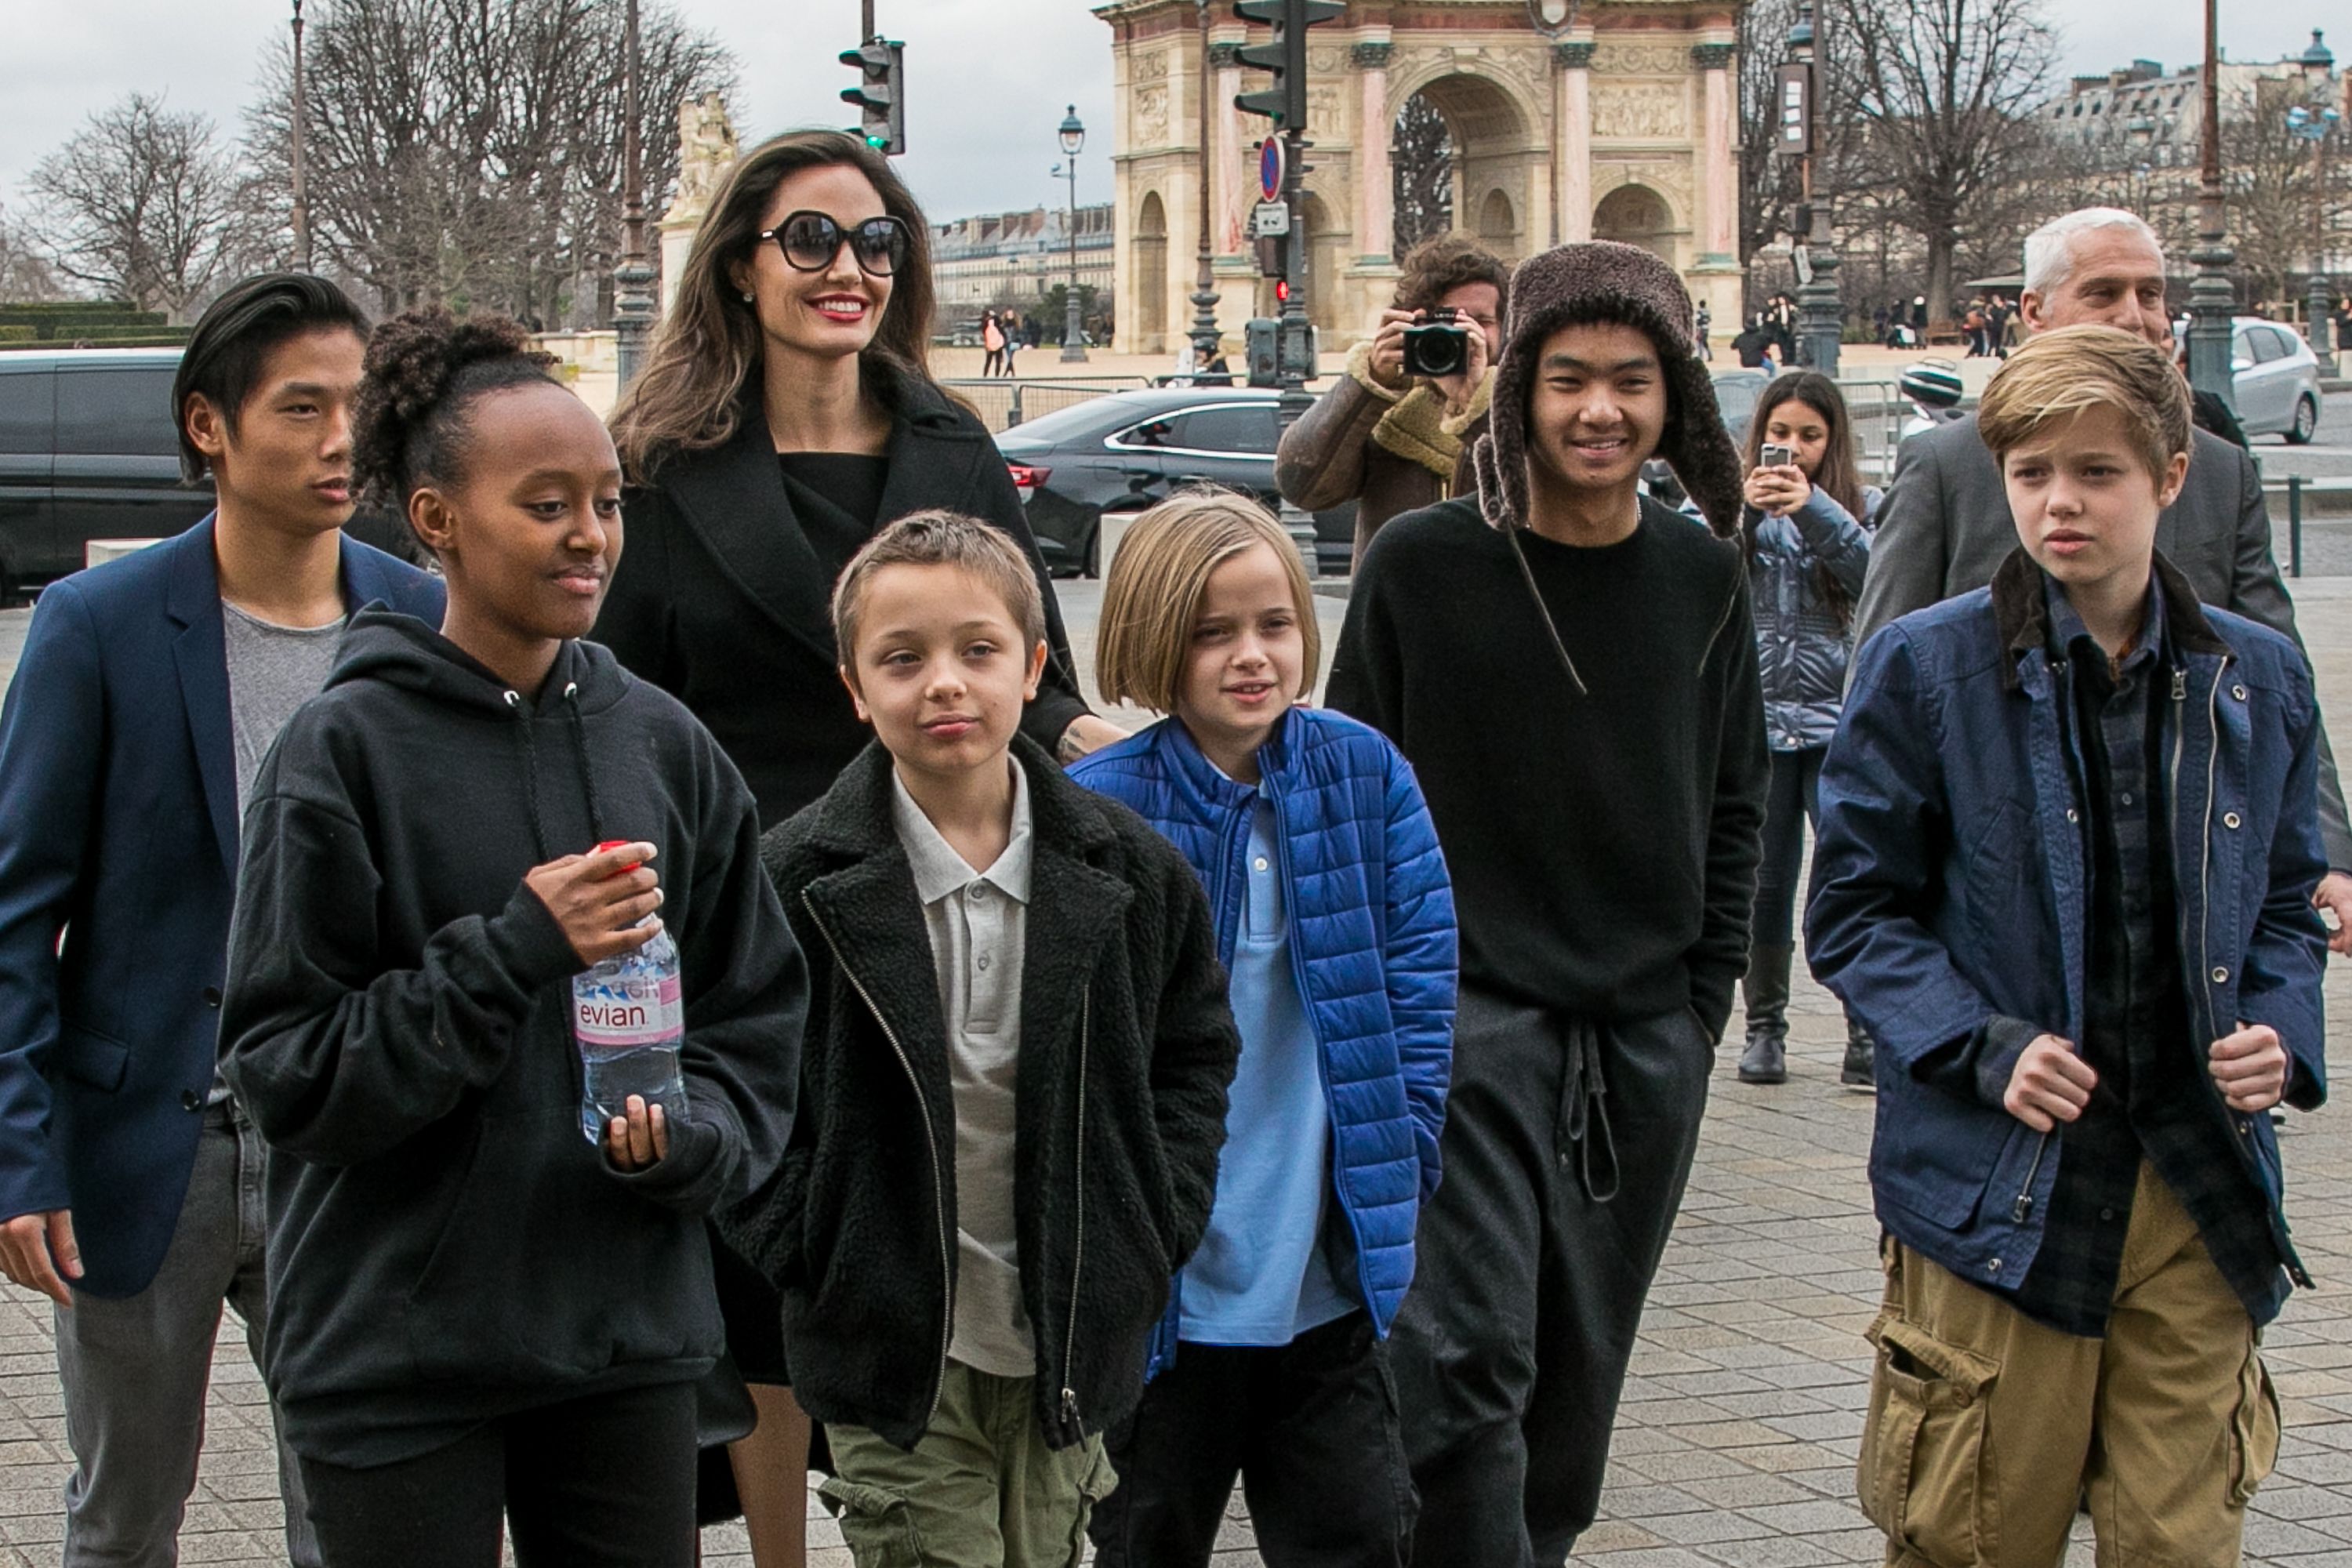 Angelina Jolie and her children Maddox, Shiloh, Vivienne, Knox, Zahara, and Pax Jolie-Pitt arriving at the Louvre museum on January 30, 2018, in Paris, France | Photo: Marc Piasecki/GC Images/Getty Images